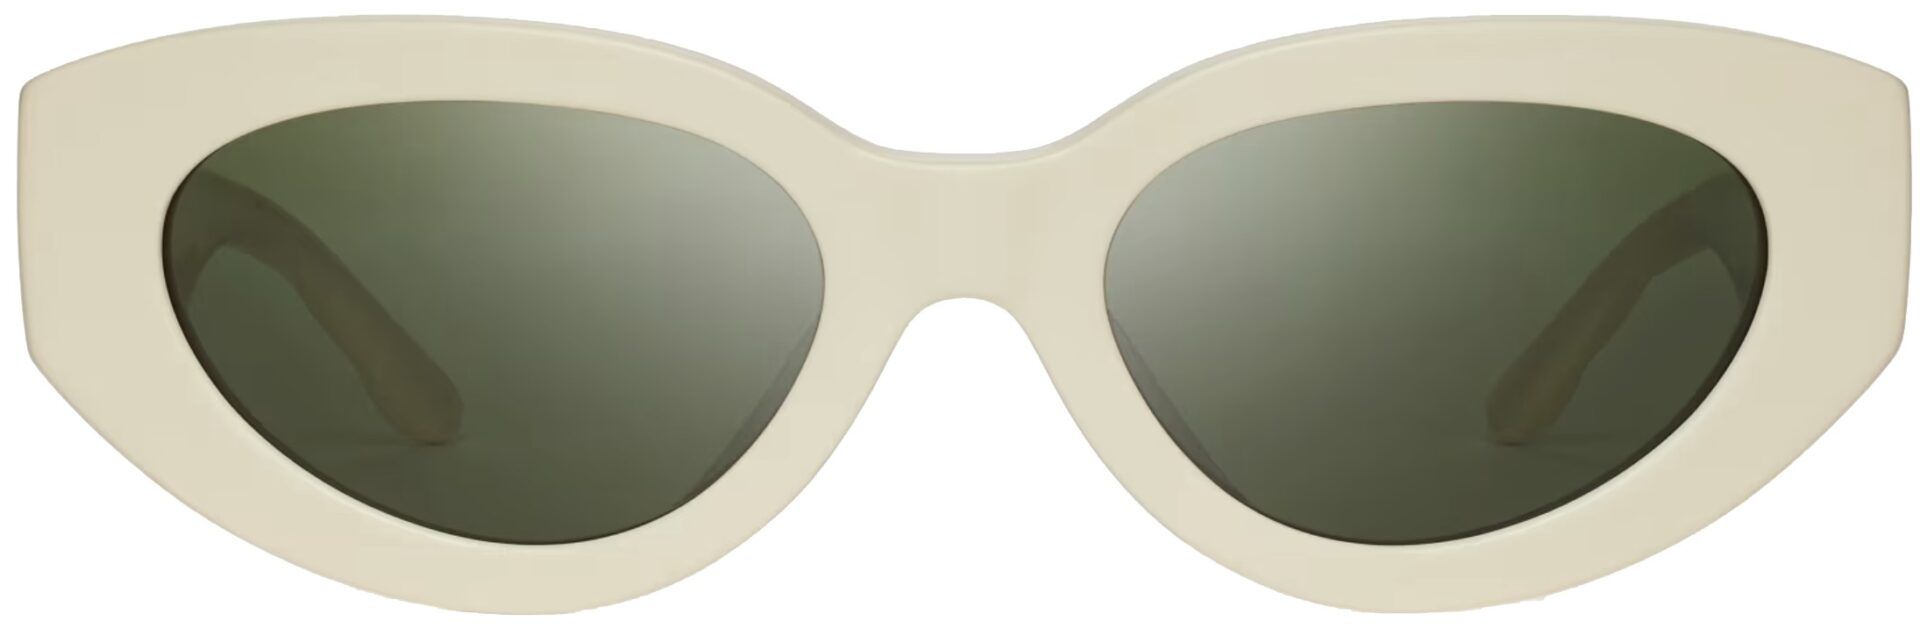 Sunglasses (TY7178 Solid Ivory) | style